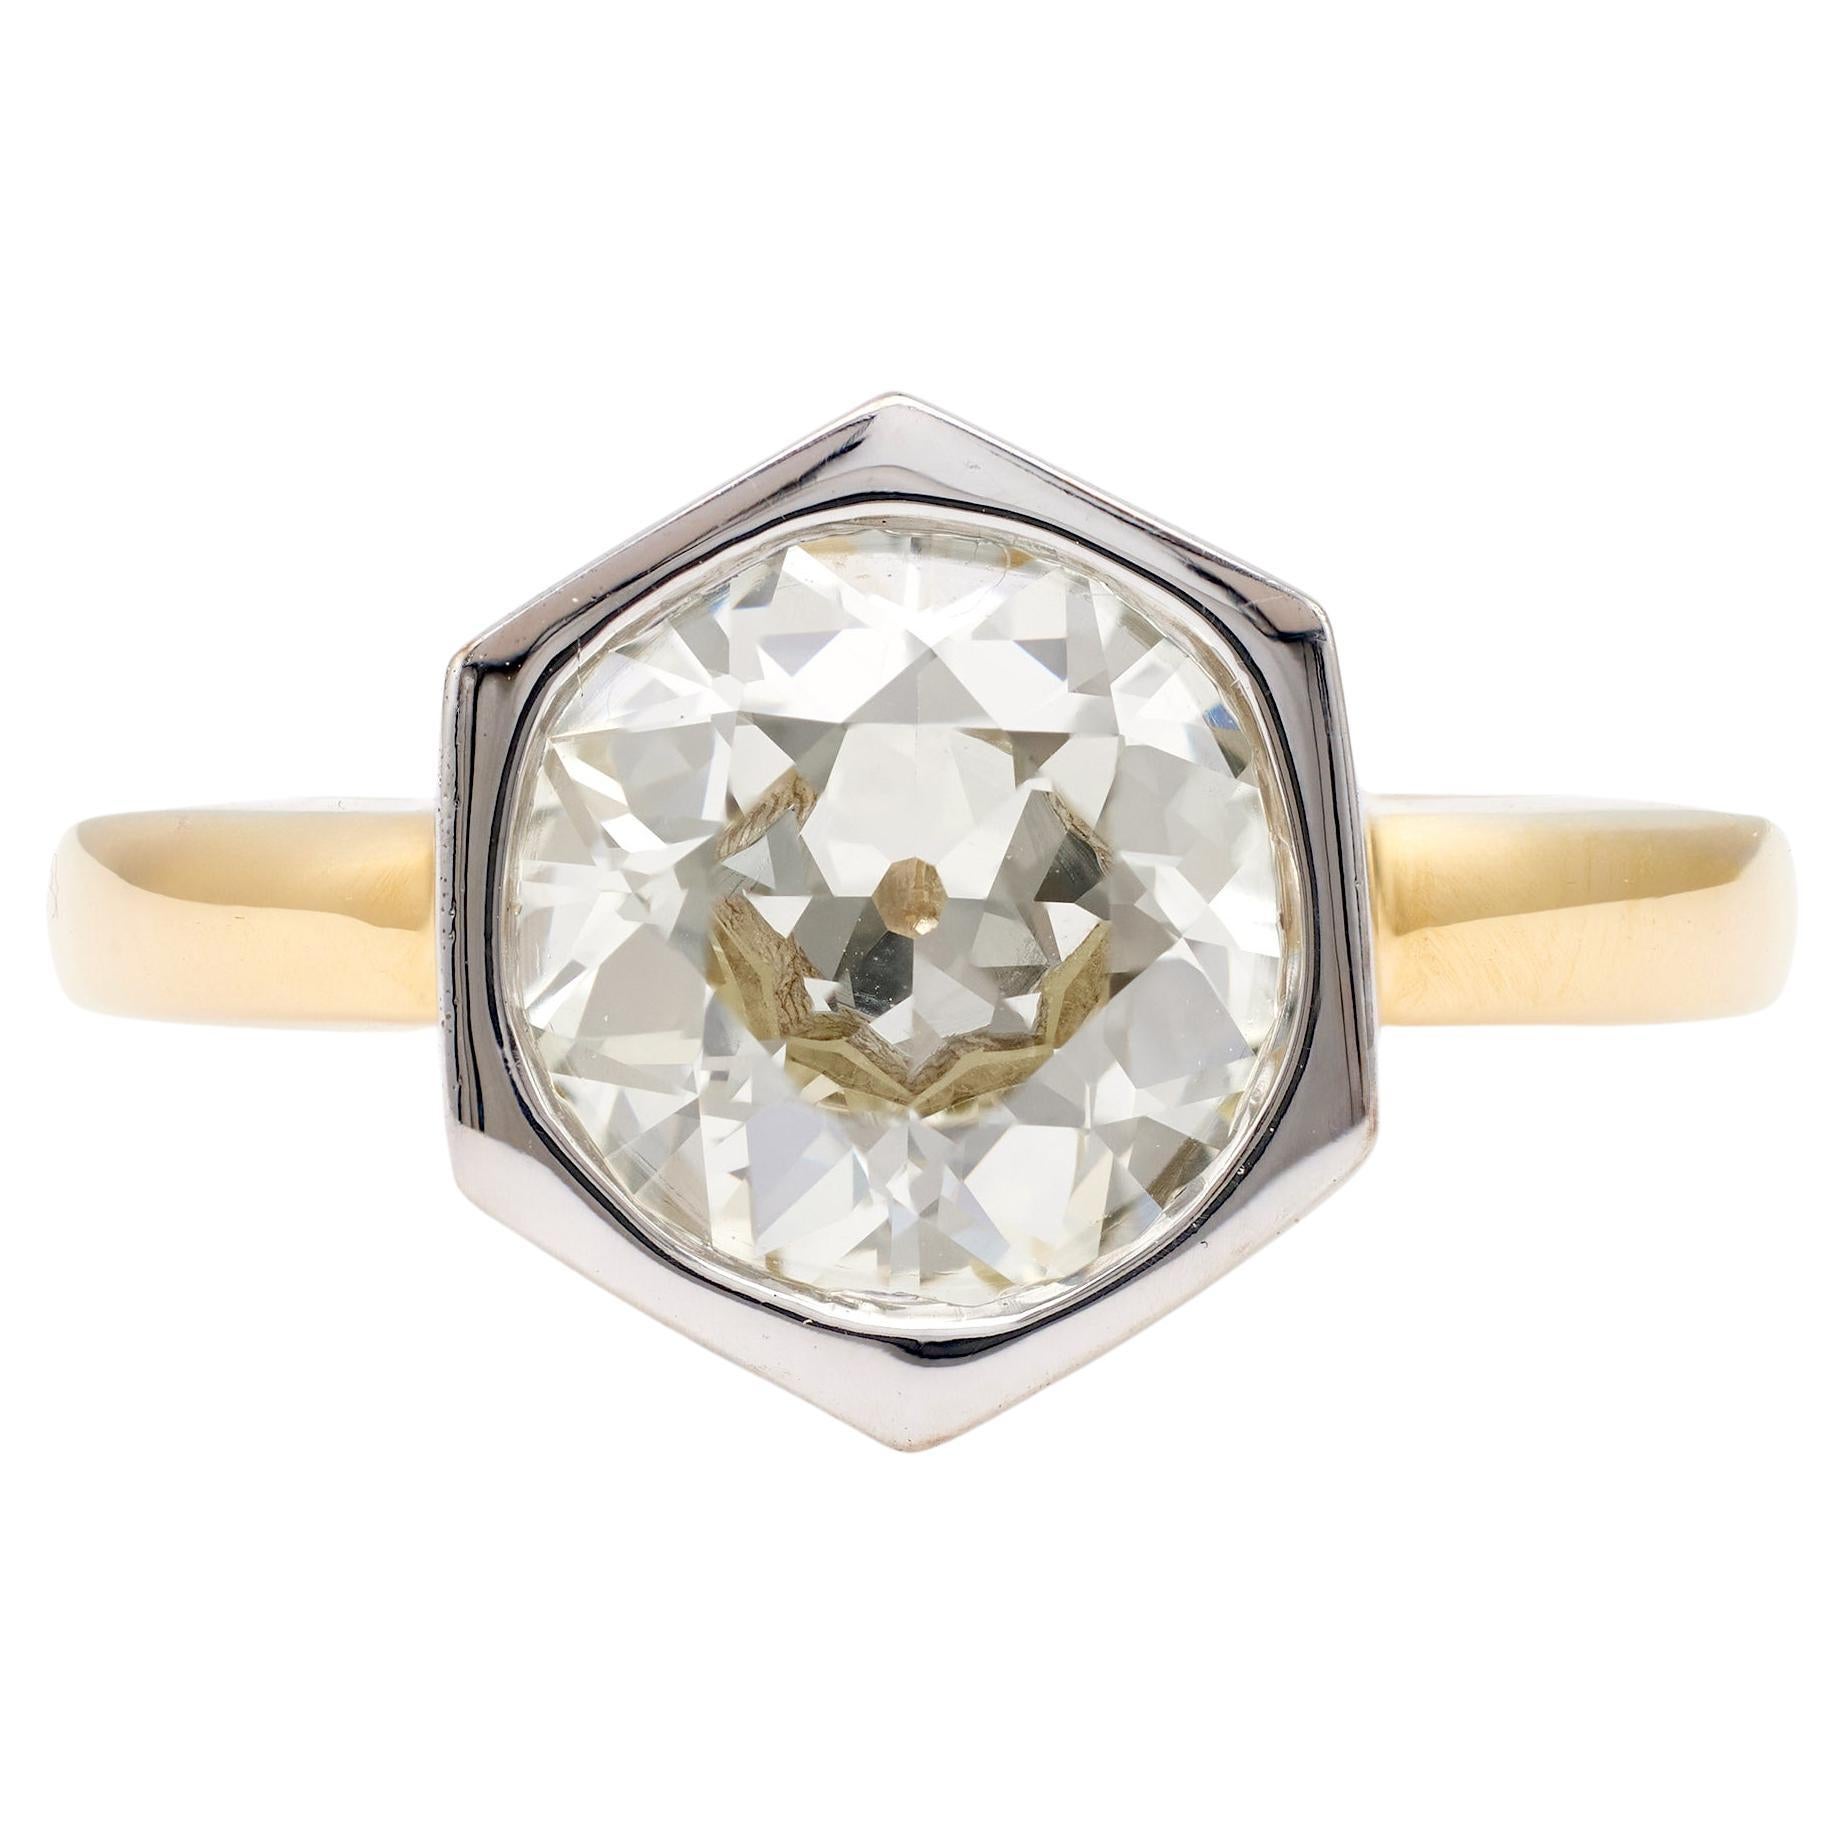 French GIA 3.21 Carat Old European Cut Diamond 18k Gold Solitaire Ring